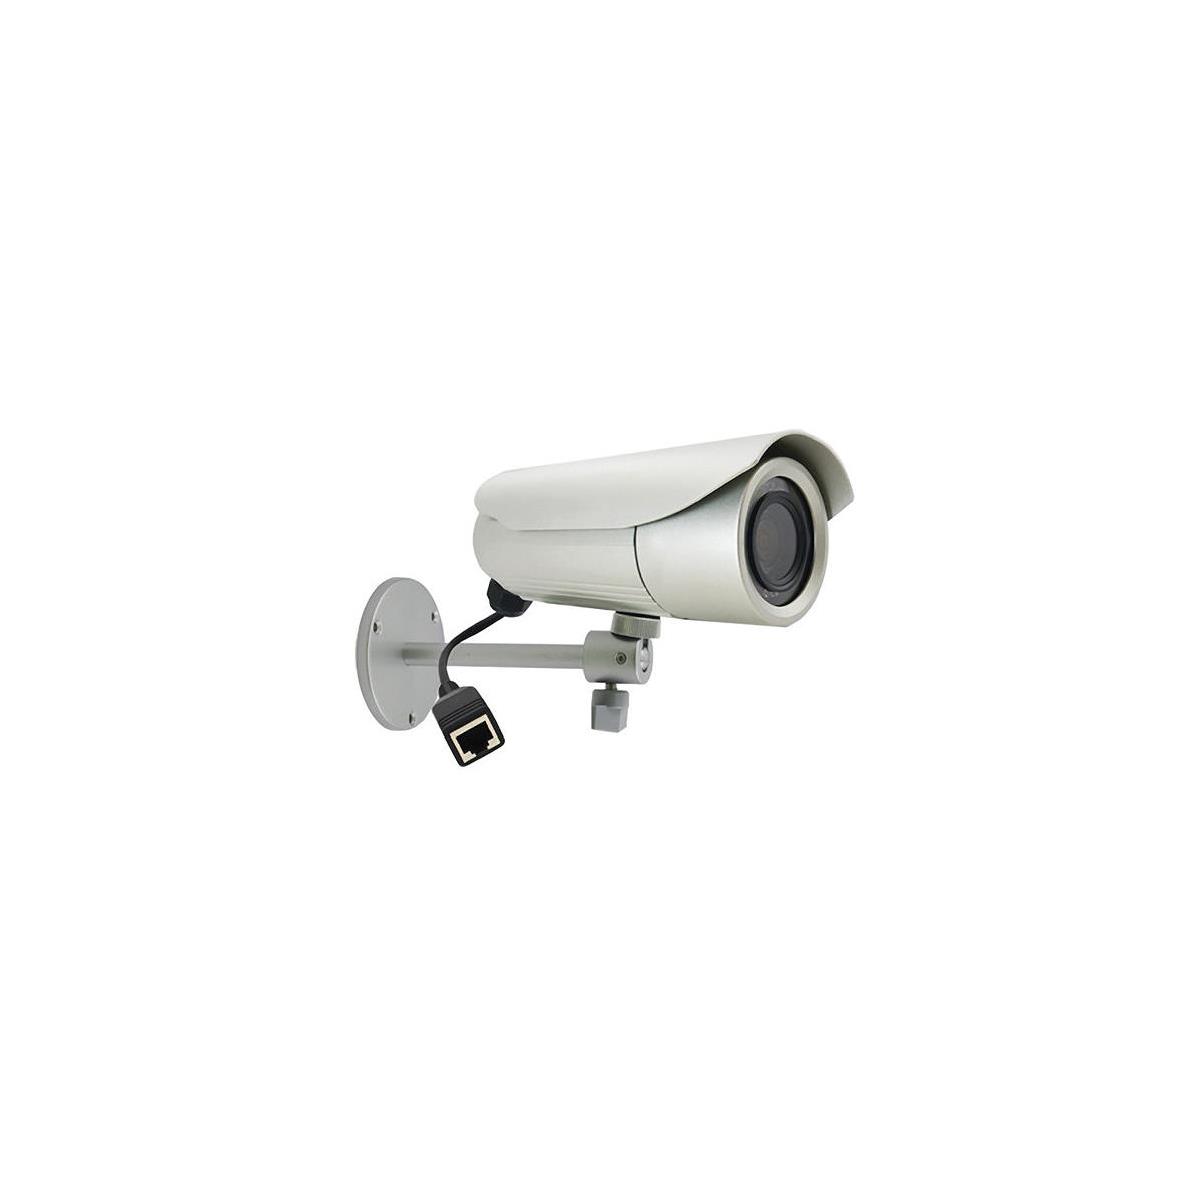 Image of ACTi E31A Day/Night Outdoor IP Bullet Camera